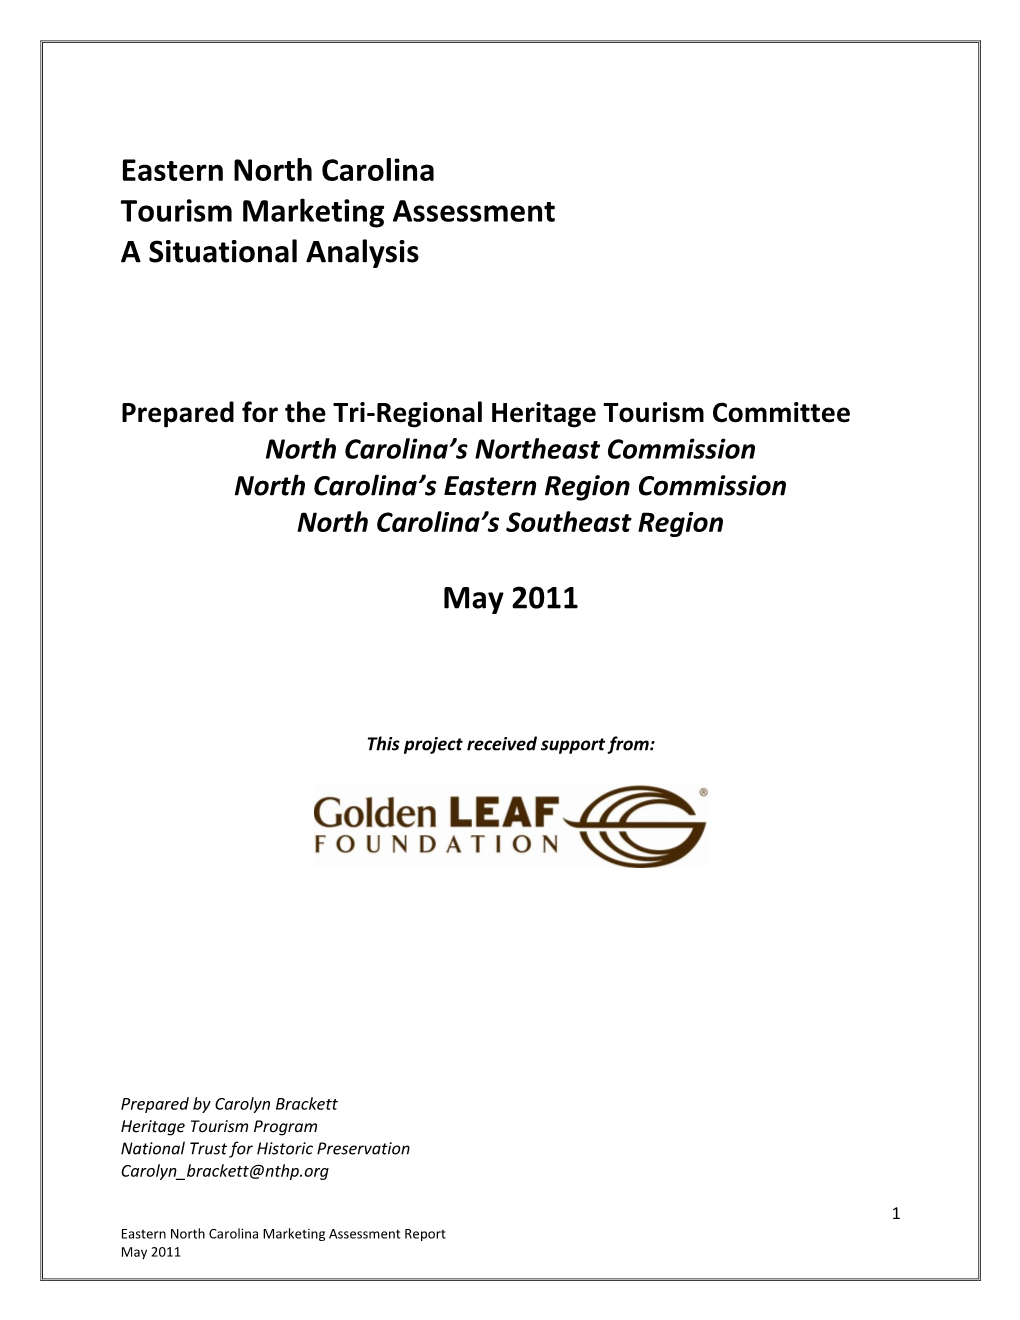 Eastern North Carolina Marketing Assessment Report May 2011 Table of Contents